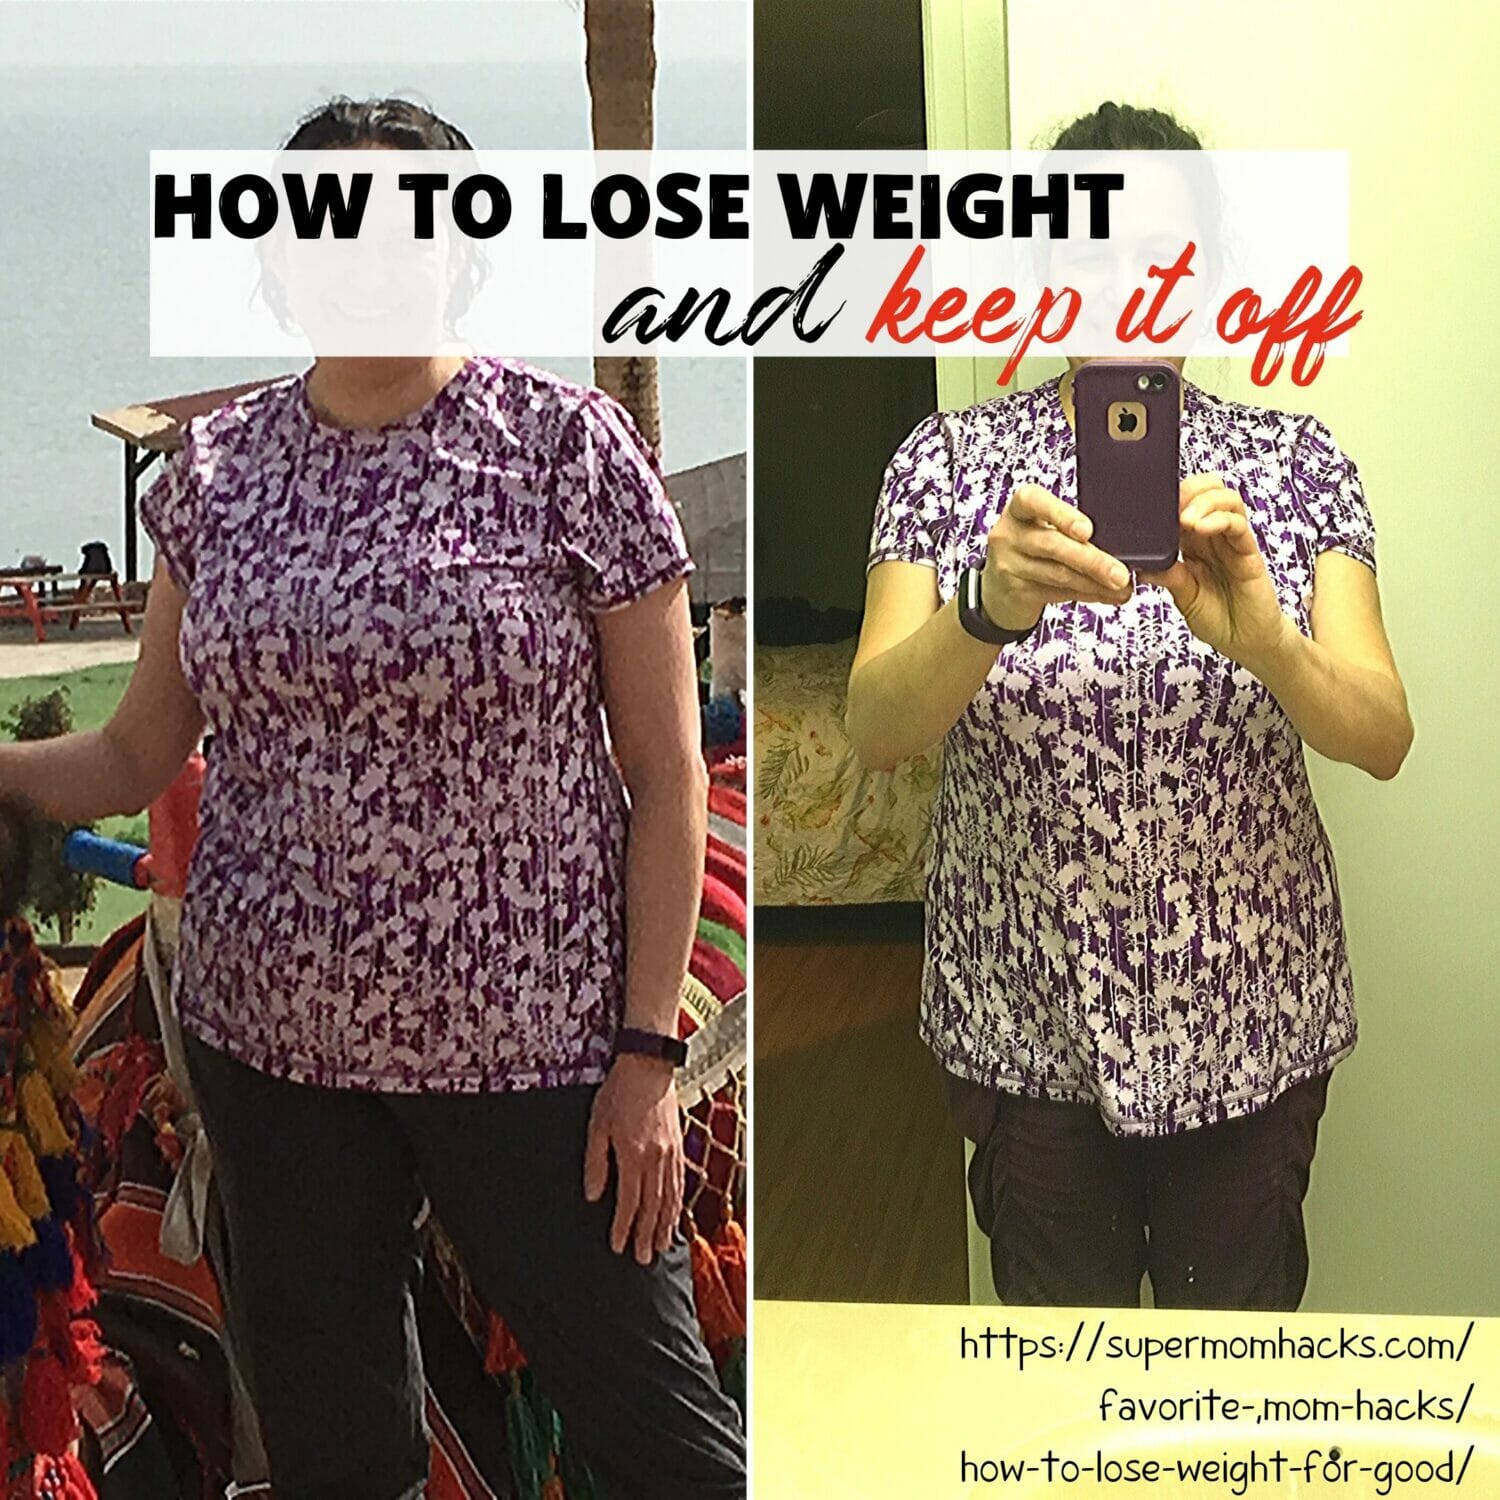 Do you want to learn how to lose weight and keep it off for good? A year in, I've lost weight with NOOM - and kept it off! Read how here.